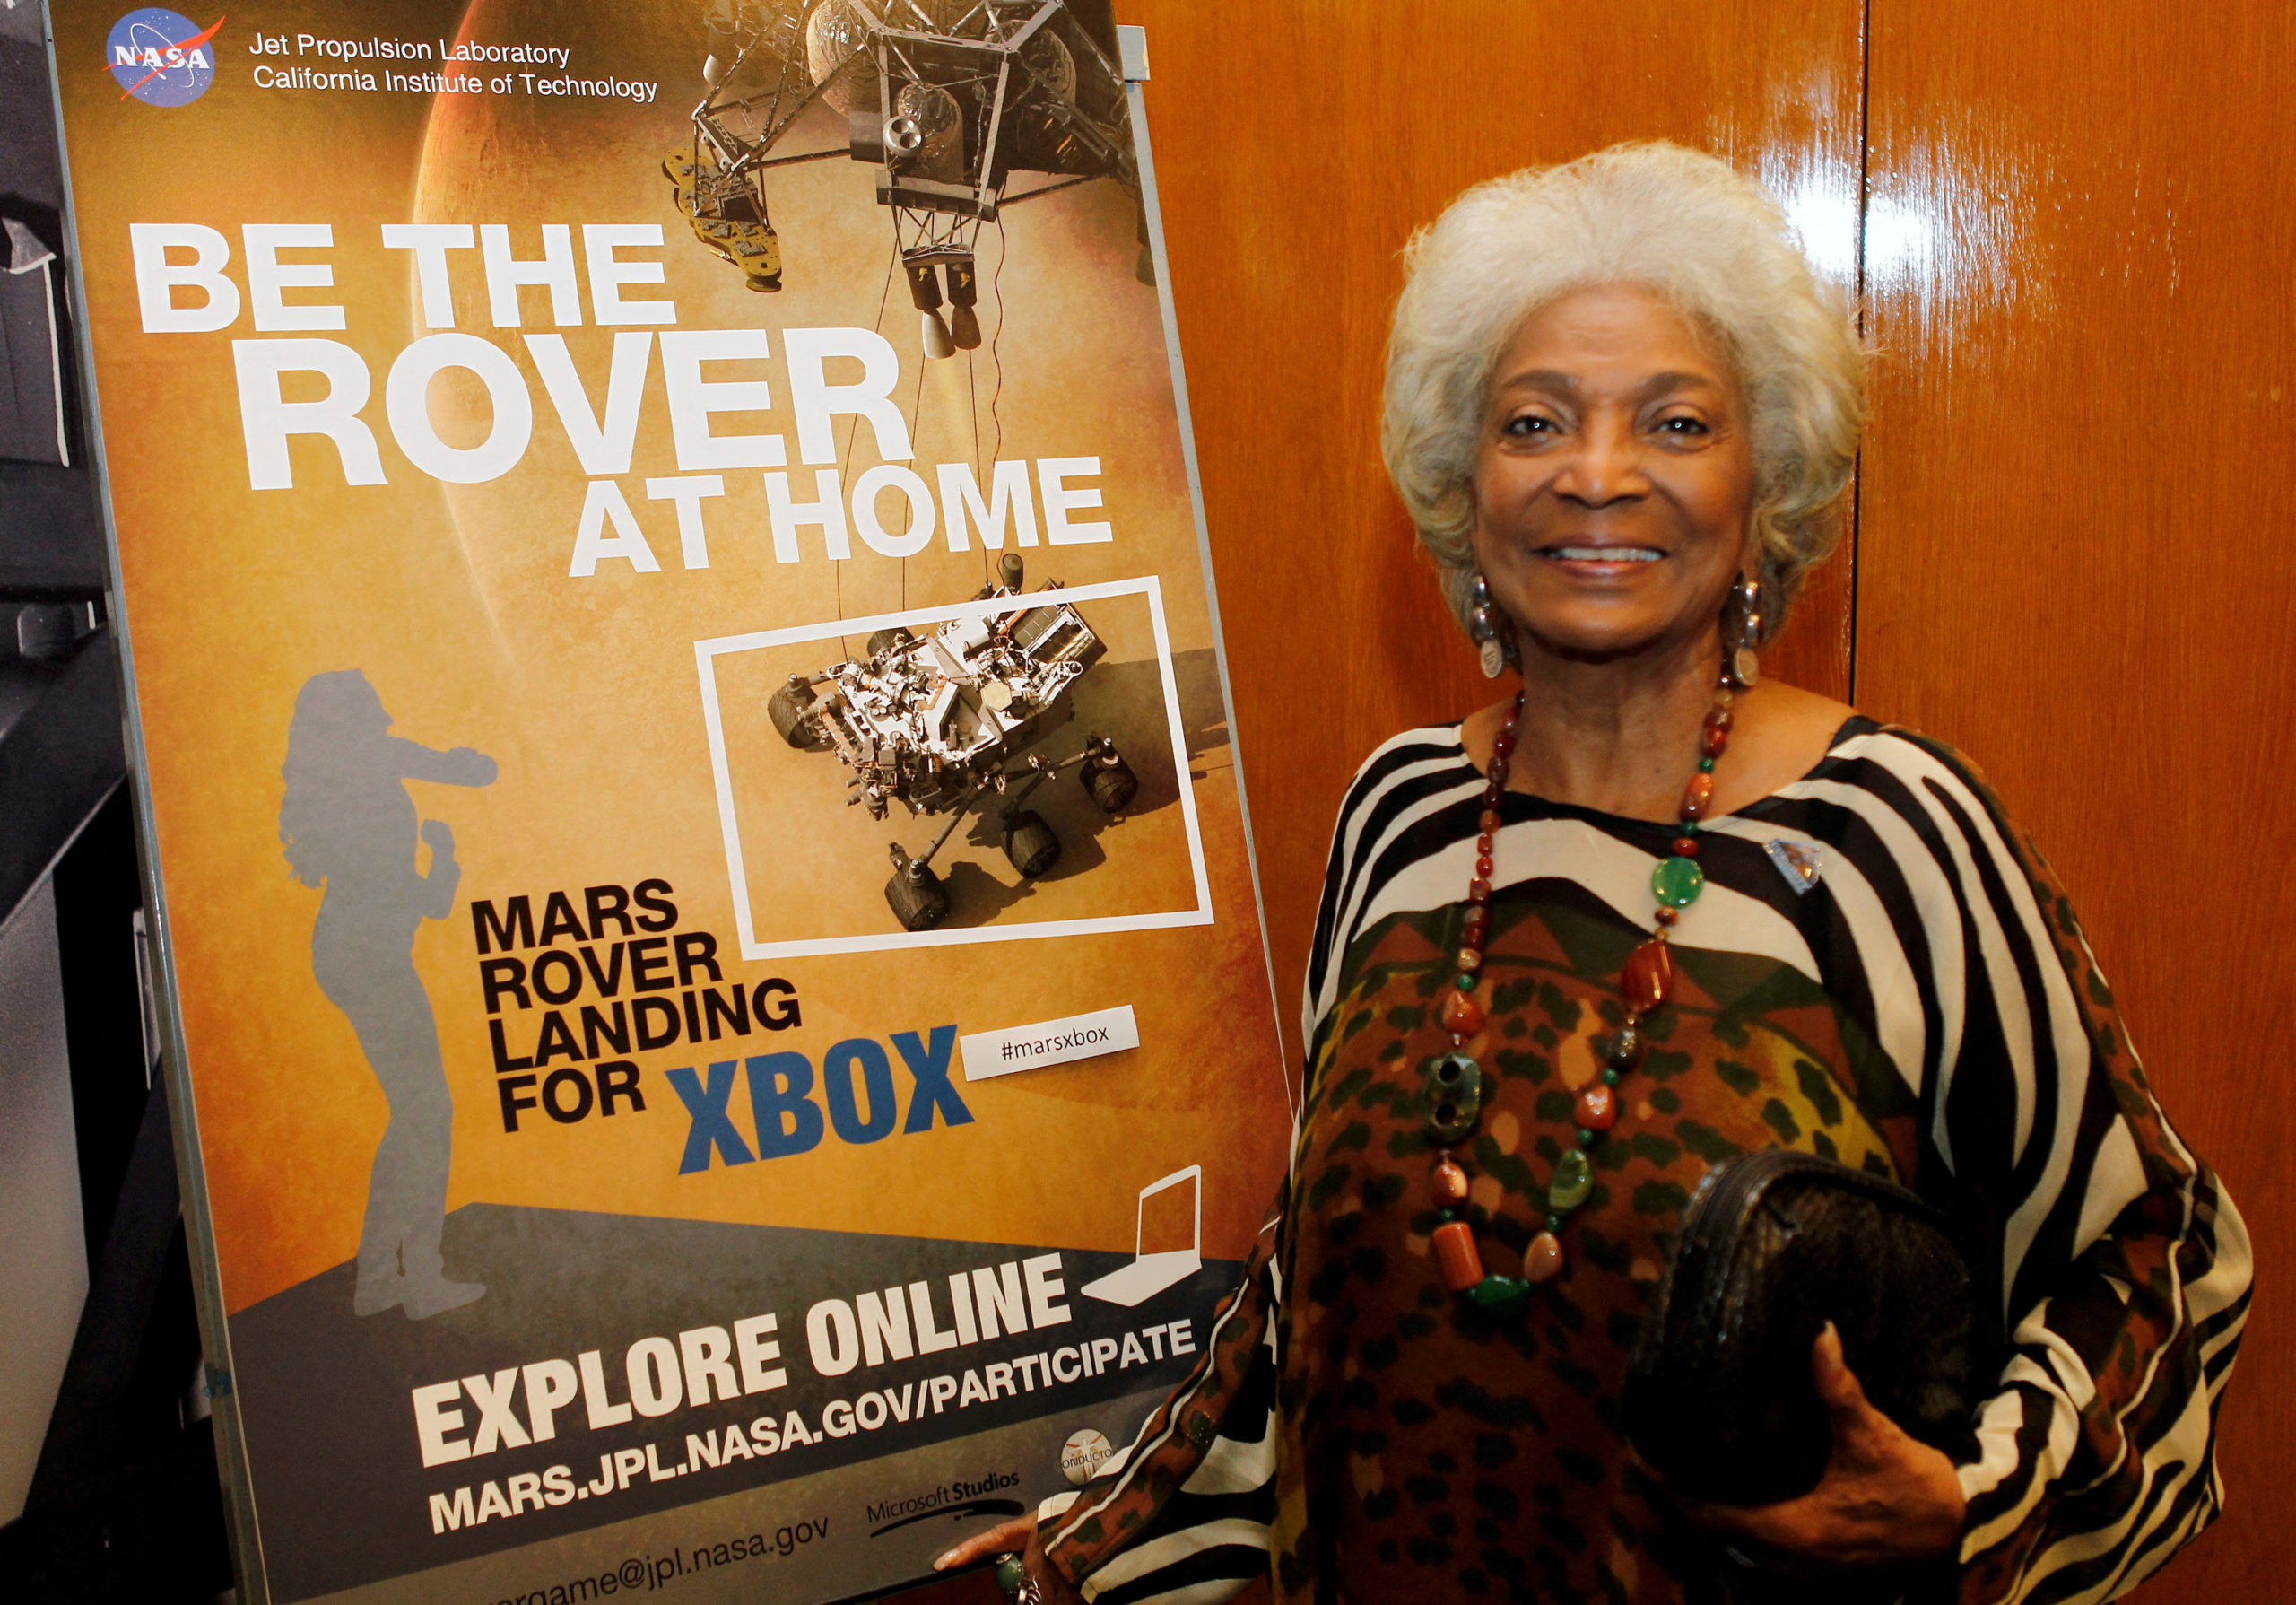 Actor Nichelle Nichols, who played the character Uhura in the original "Star Trek" TV series, poses at NASA's Jet Propulsion Lab in Pasadena, Calfiornia August 5, 2012. REUTERS/Fred Prouser